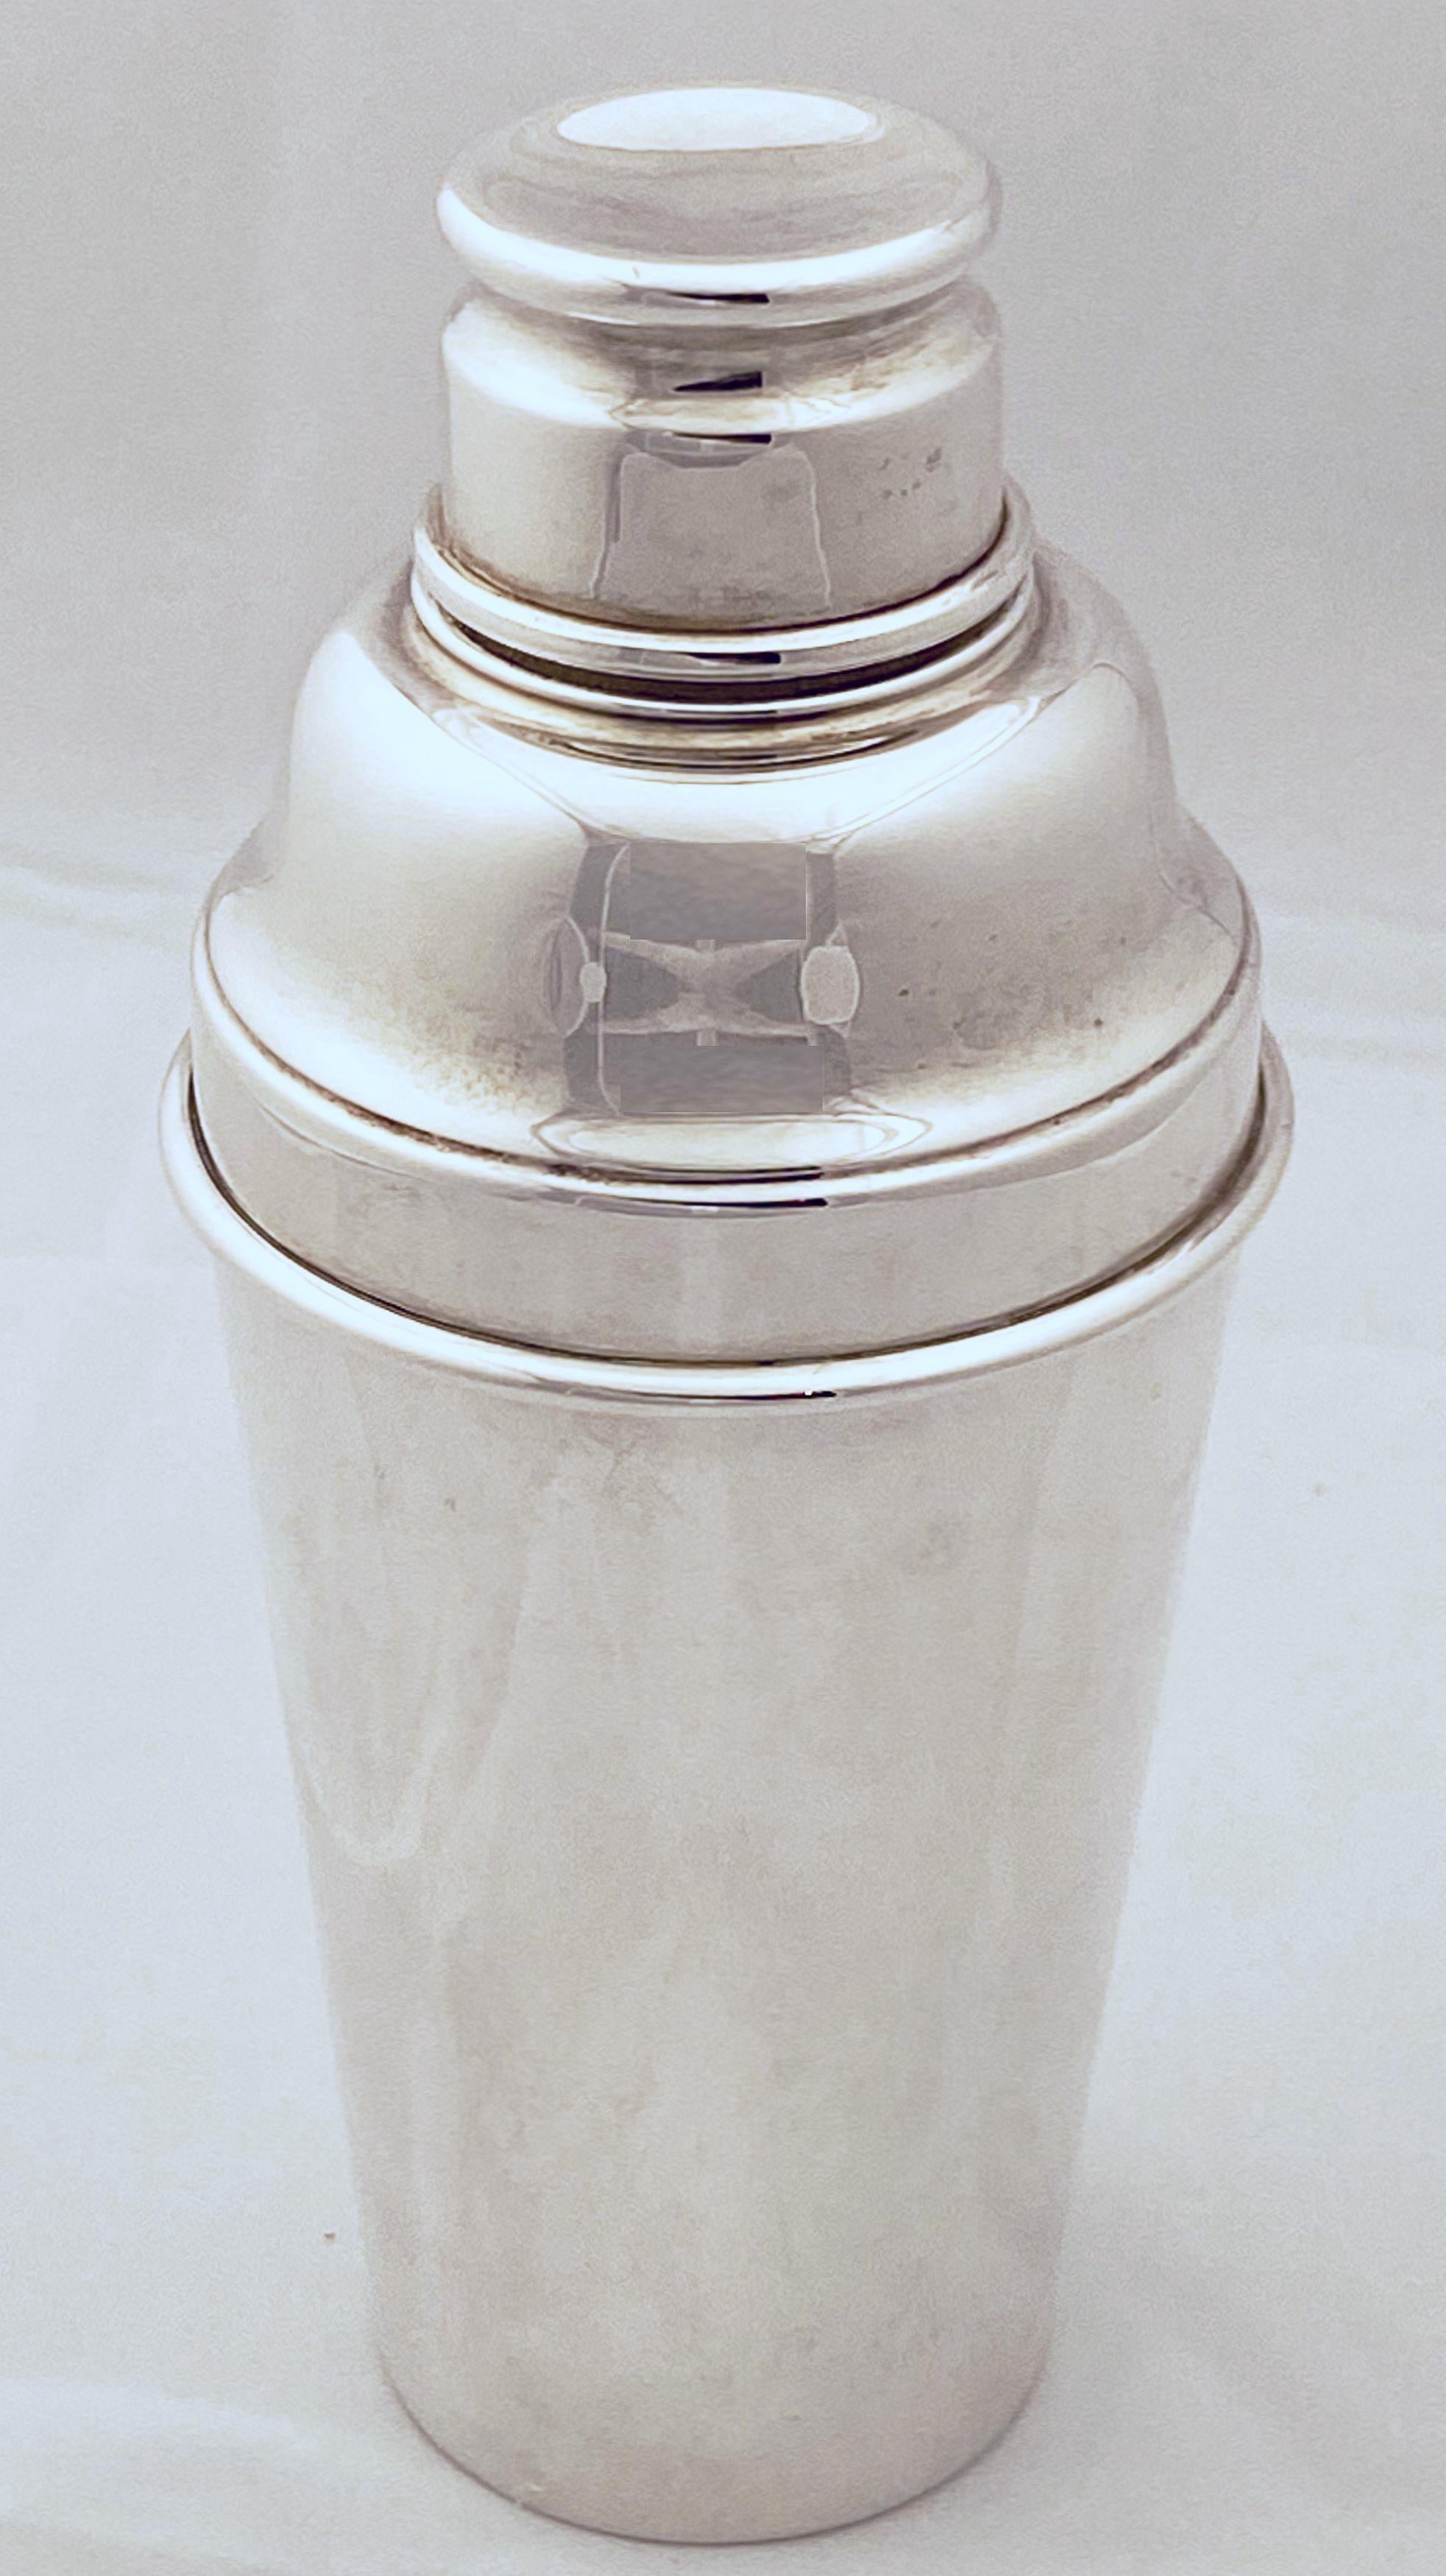 20th Century English Cocktail or Martini Shaker from the Art Deco Era by Angora